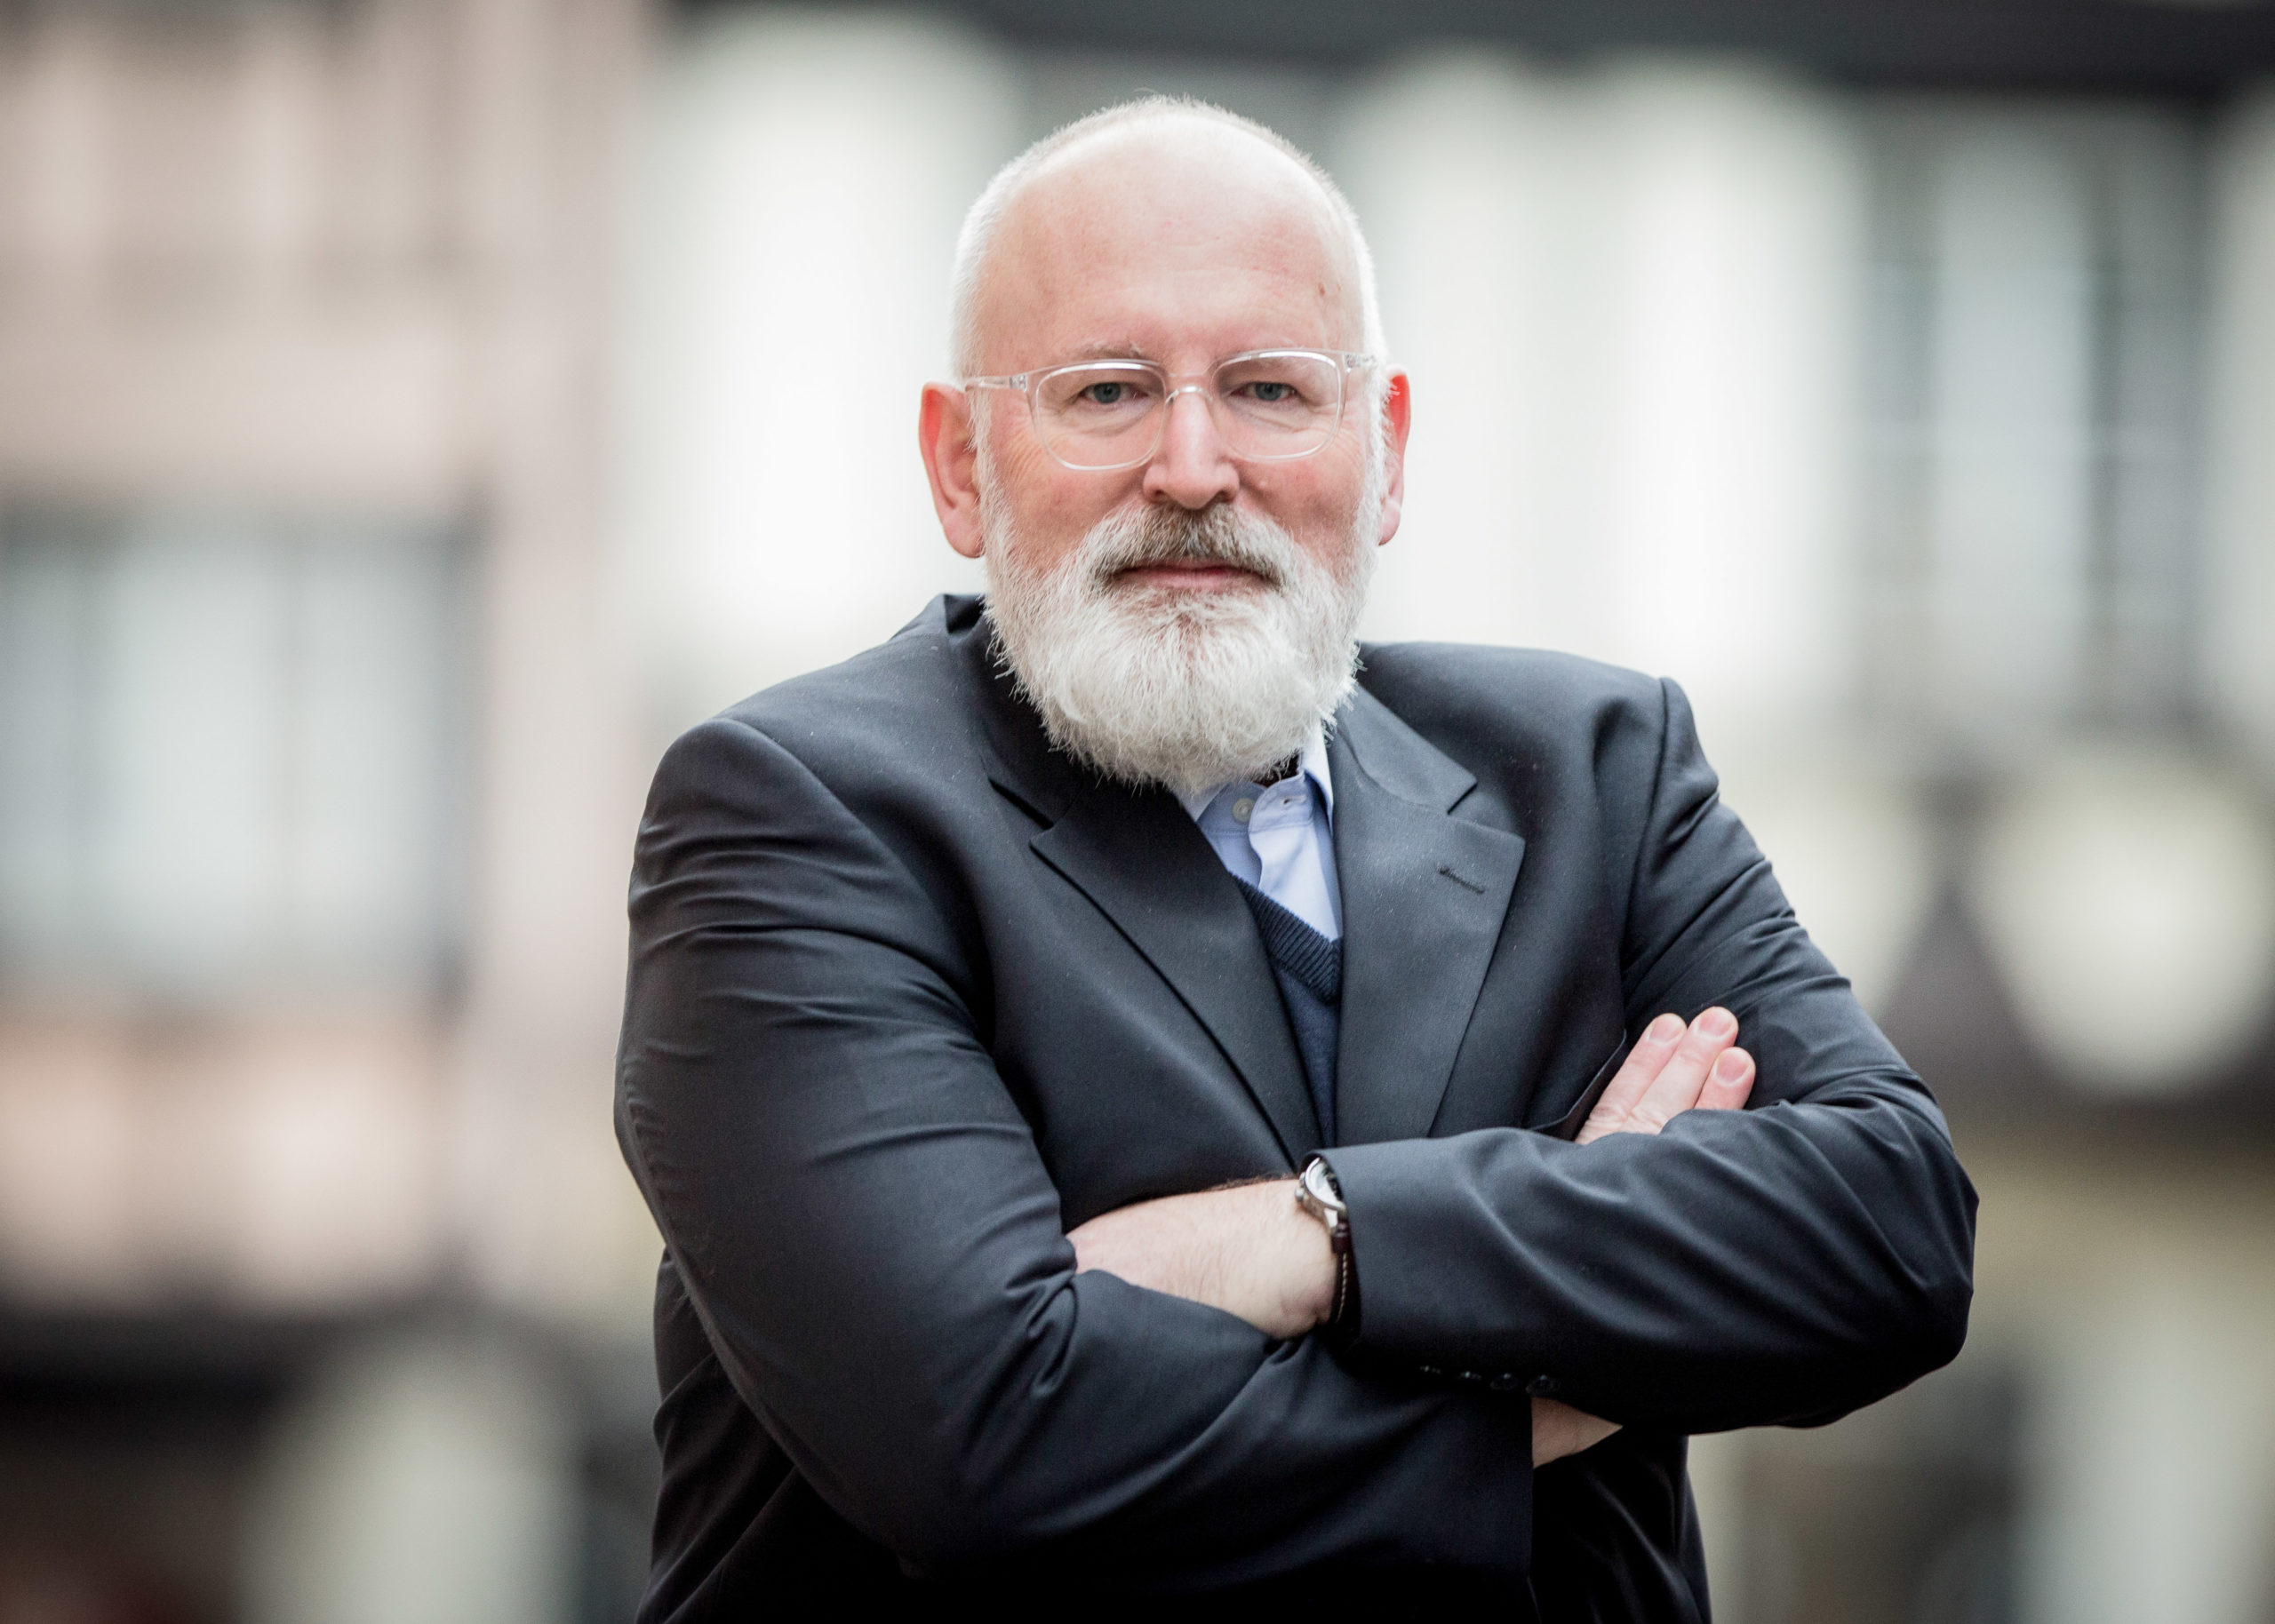 Interview: Frans Timmermans on the EU Green Deal